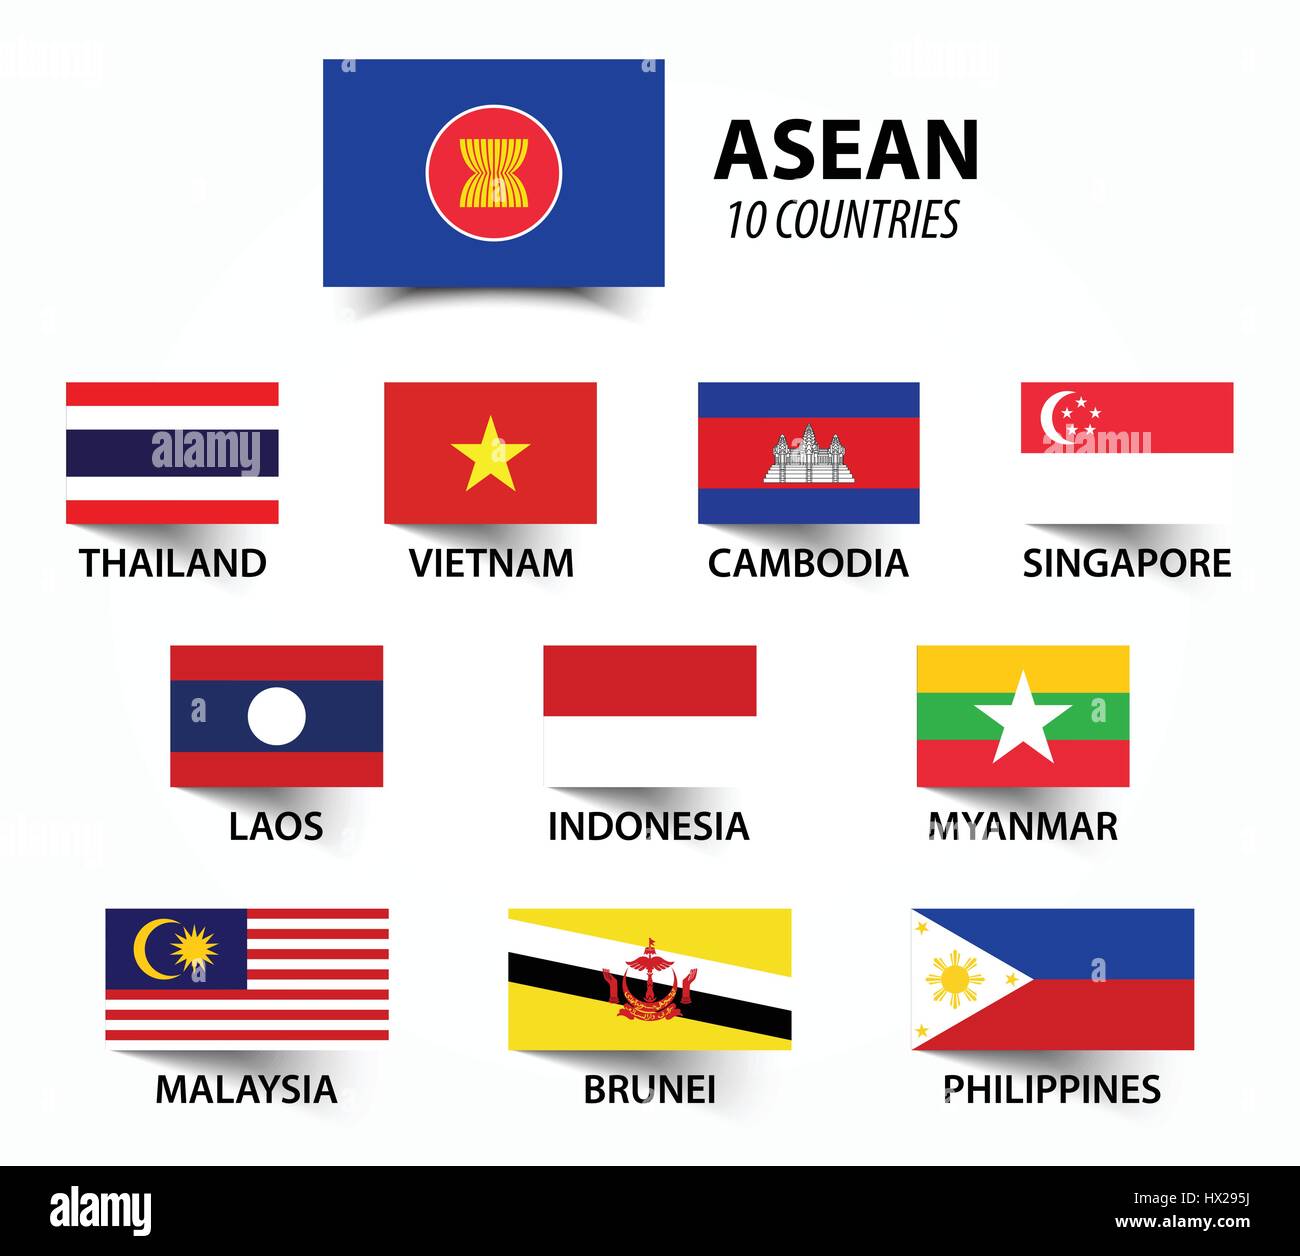 Asian Nations 2